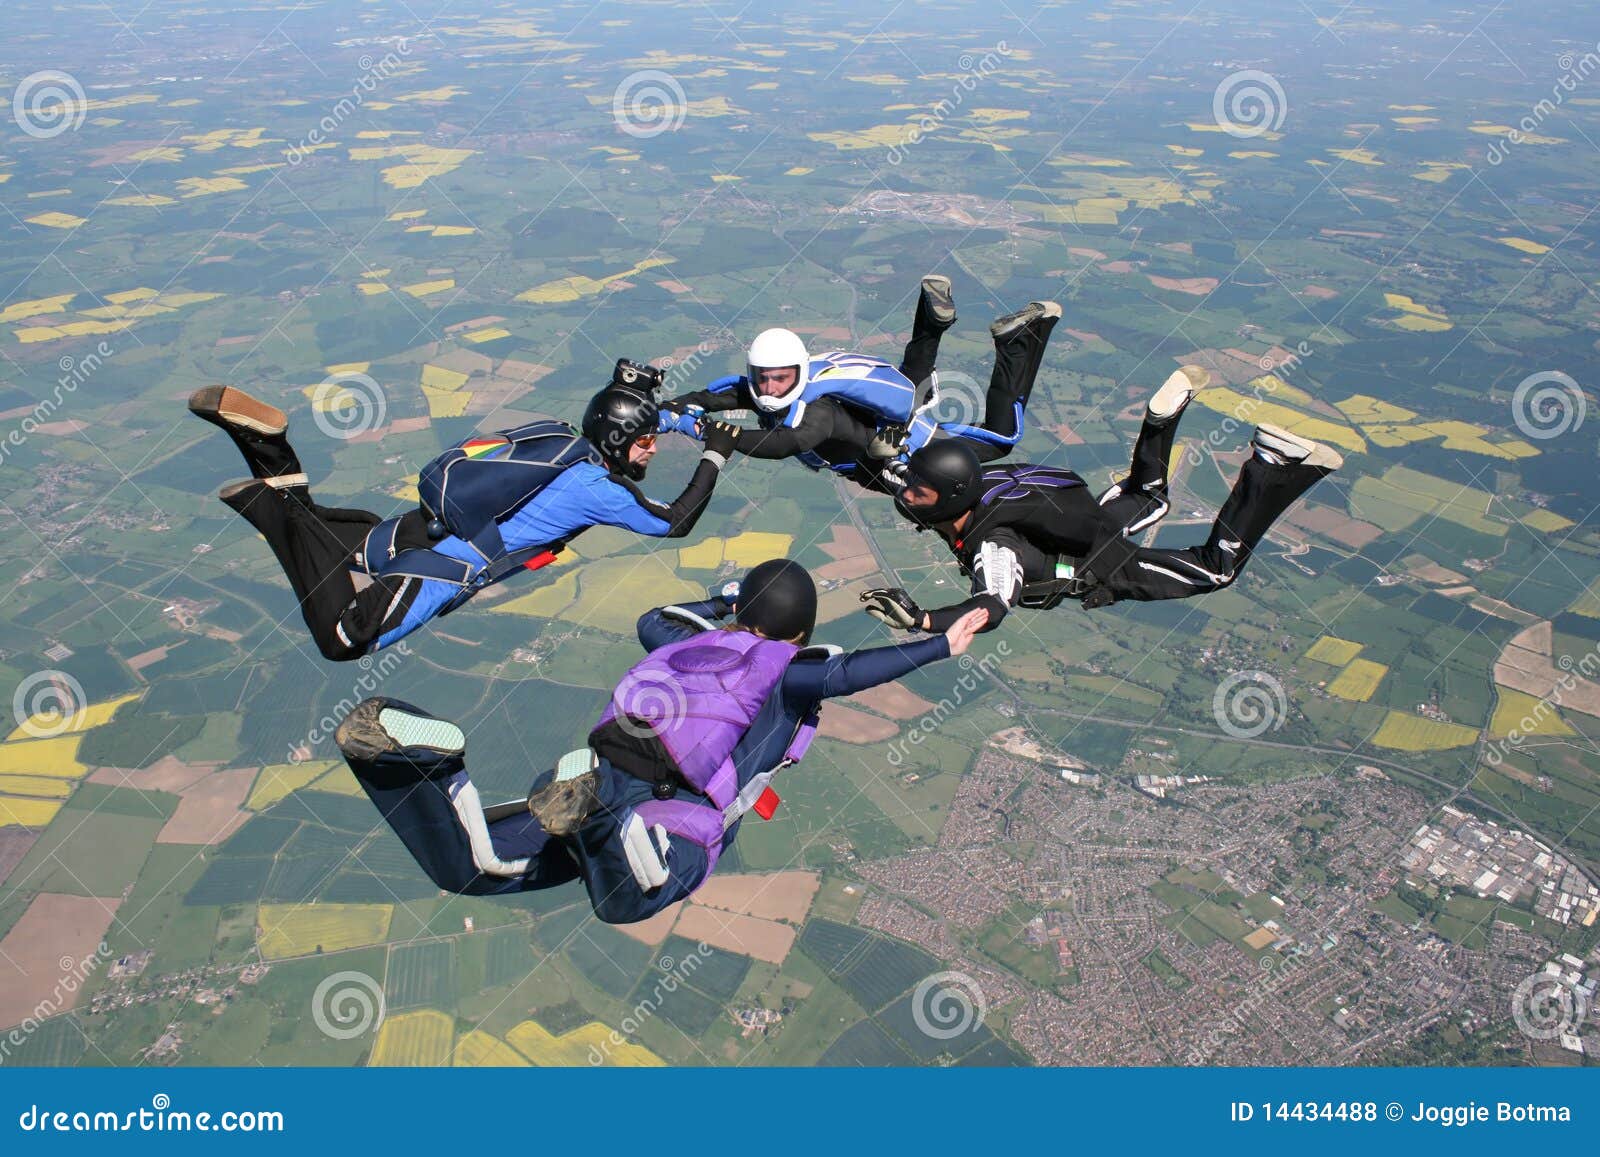 four skydivers in freefall